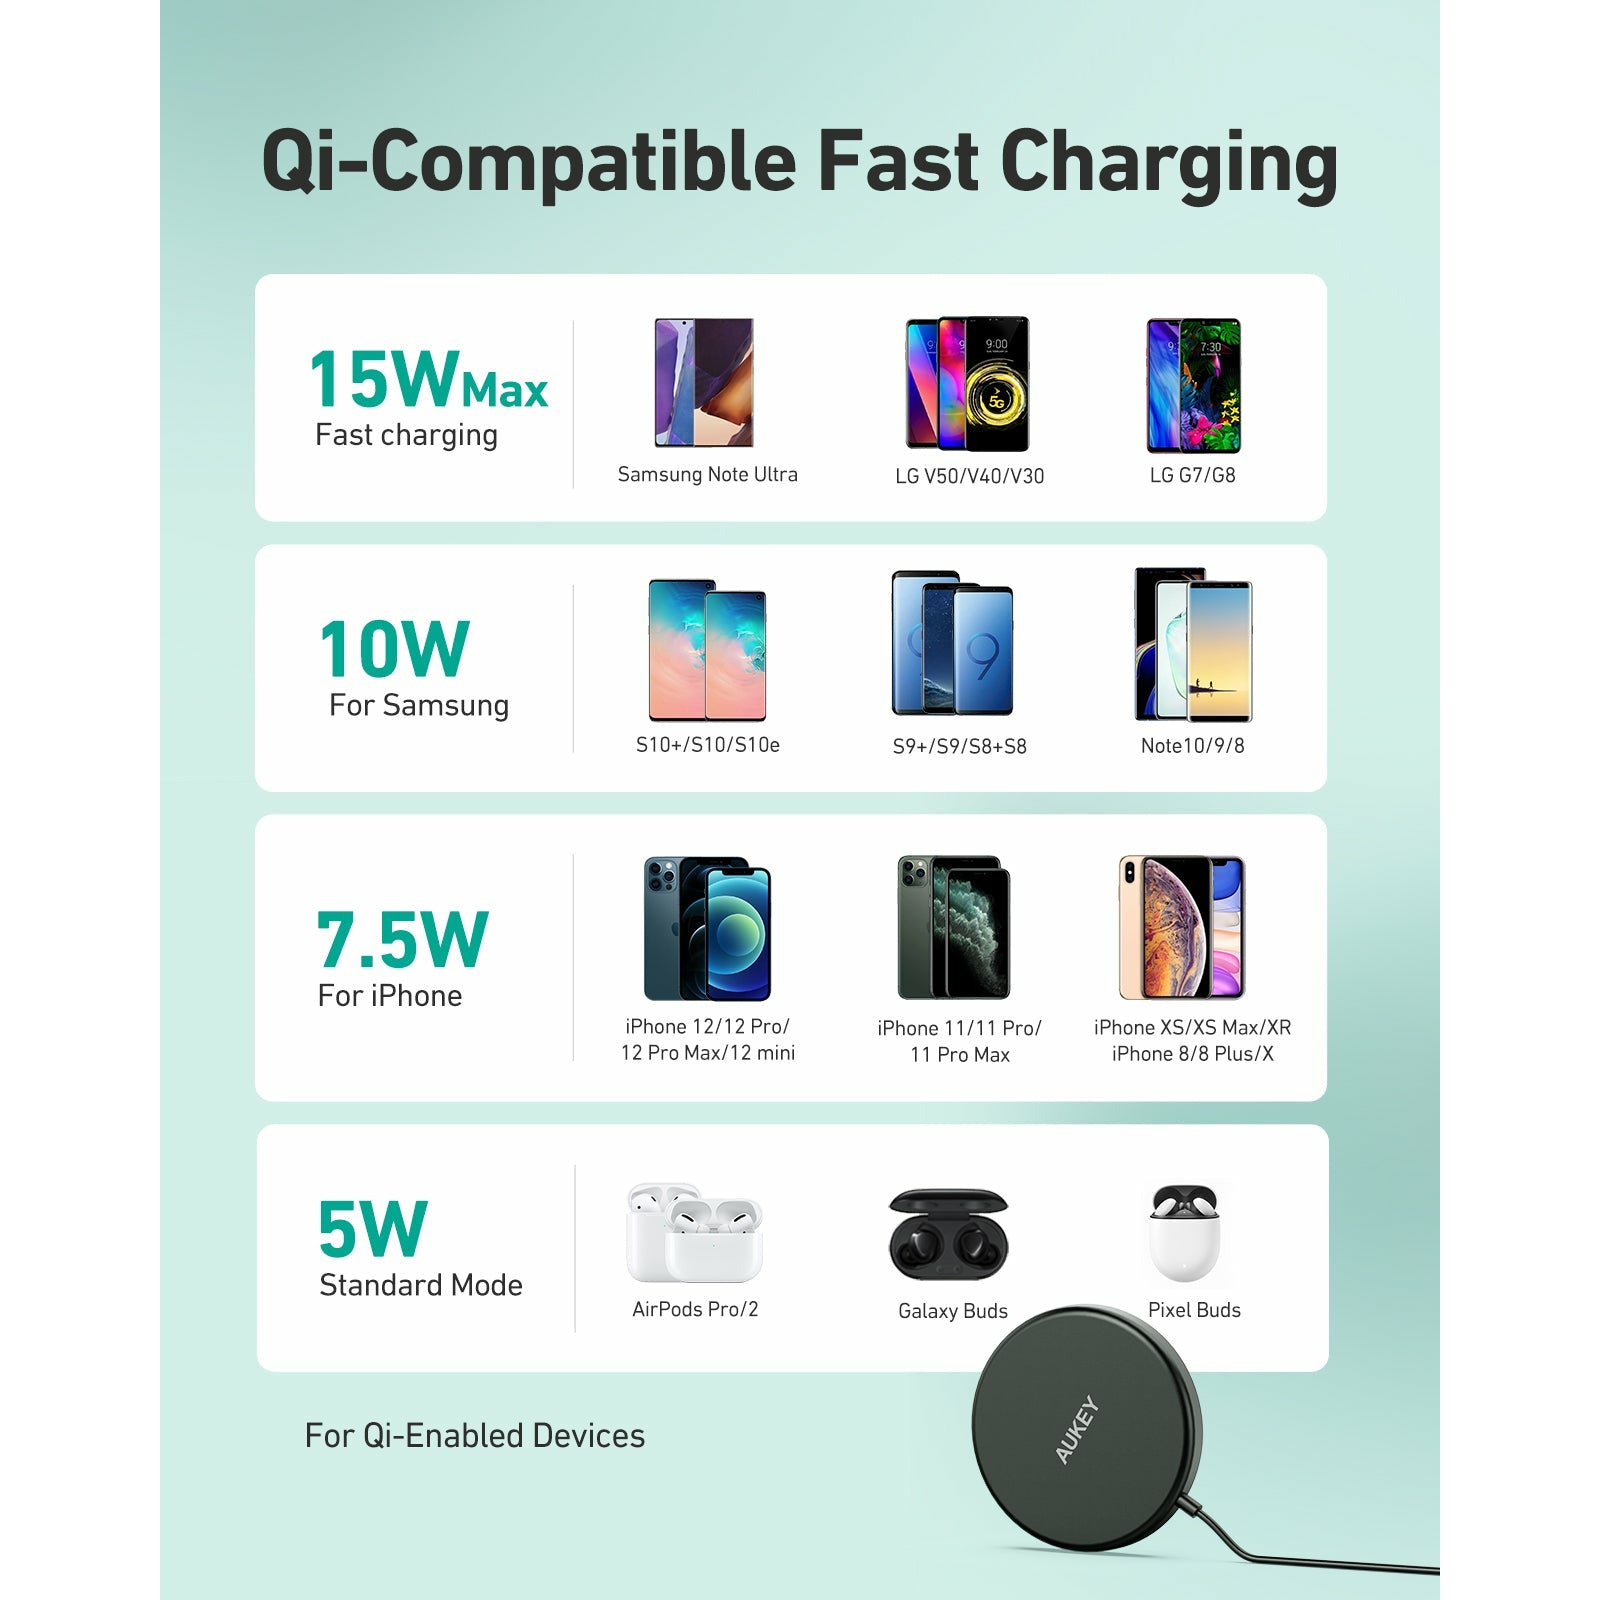 AUKEY Aircore Wireless Charger 15W Magnetic Qi Certified Black